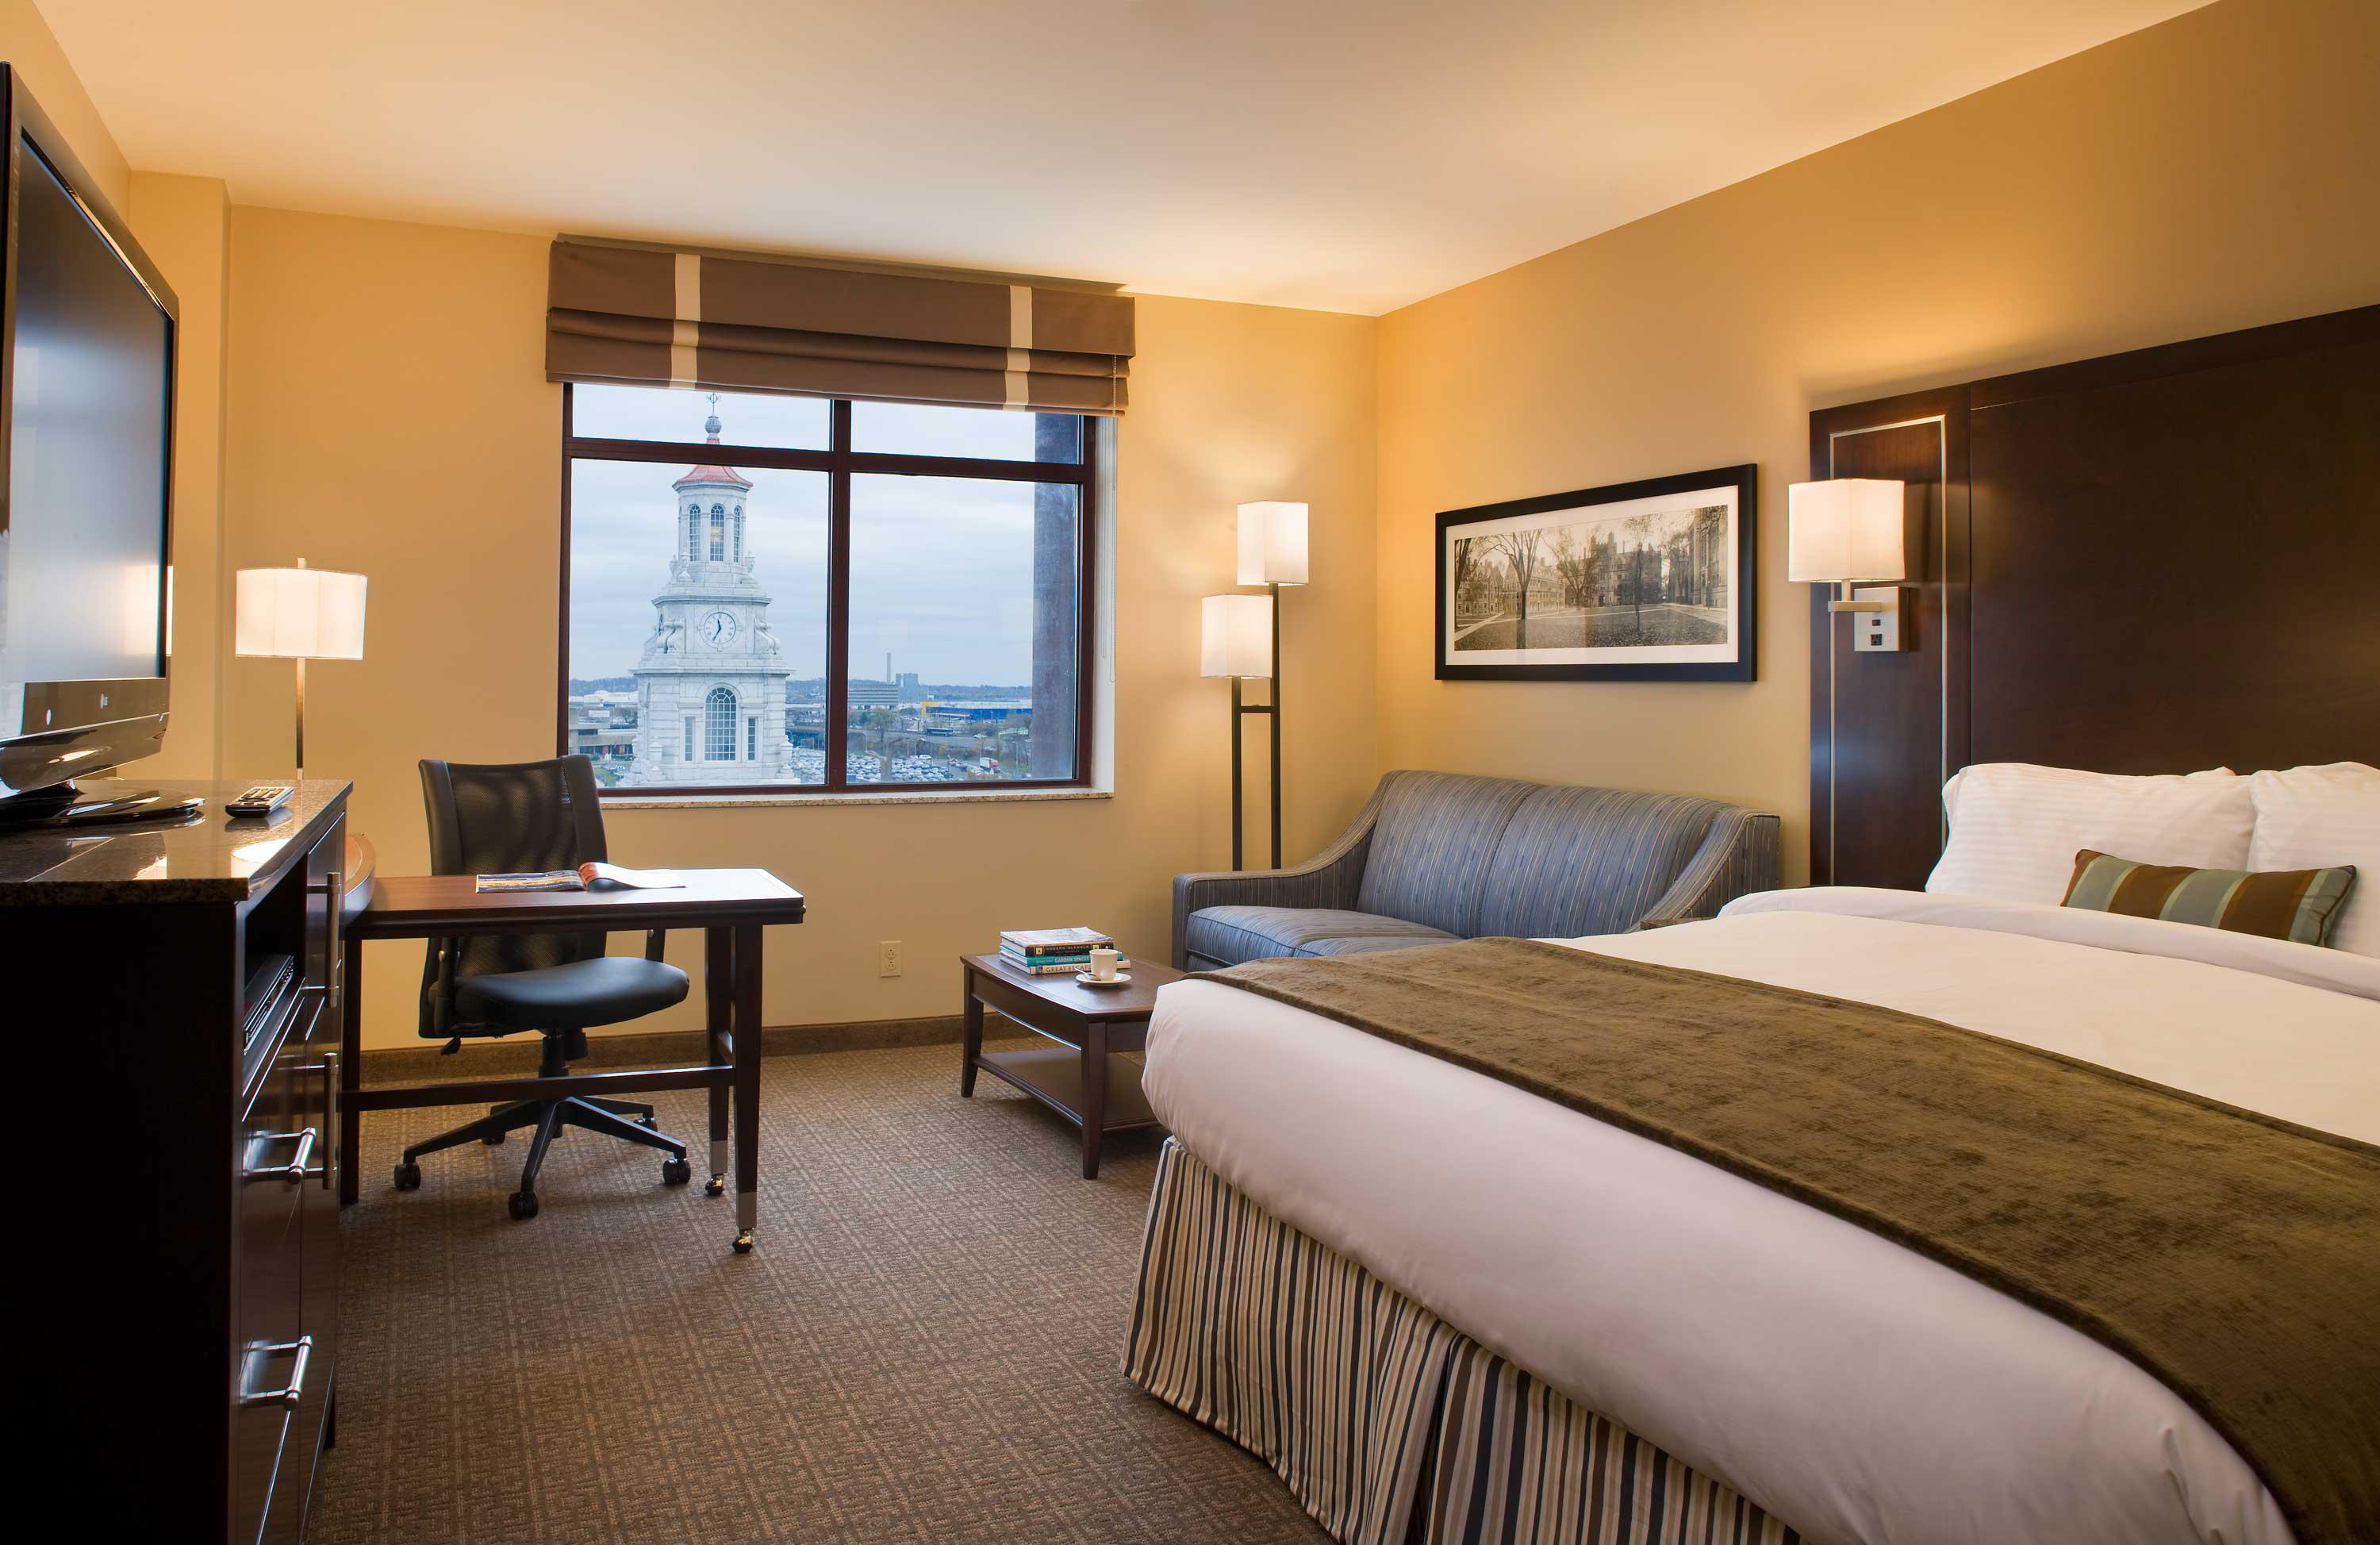 Our deluxe king guestrooms in downtown New Haven, CT feature sofa beds for extra guests.